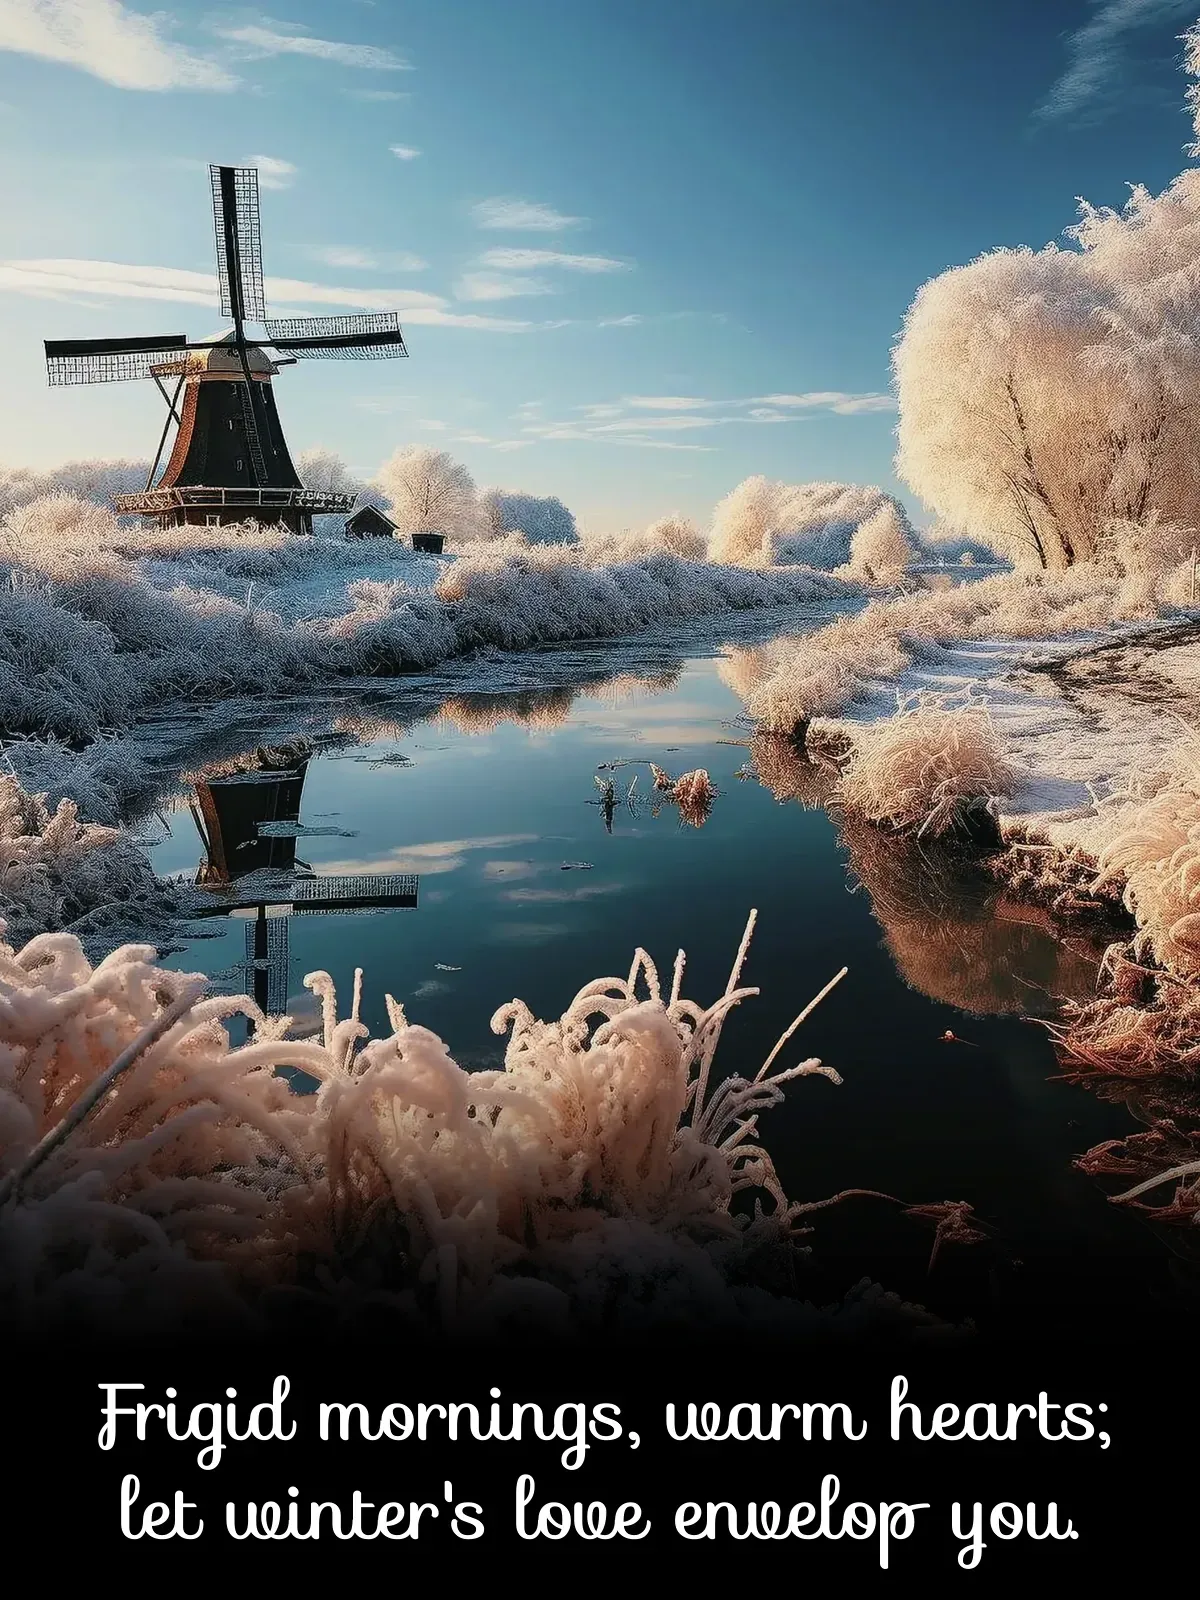 A serene winter landscape with a windmill and a calm river partially covered in snow